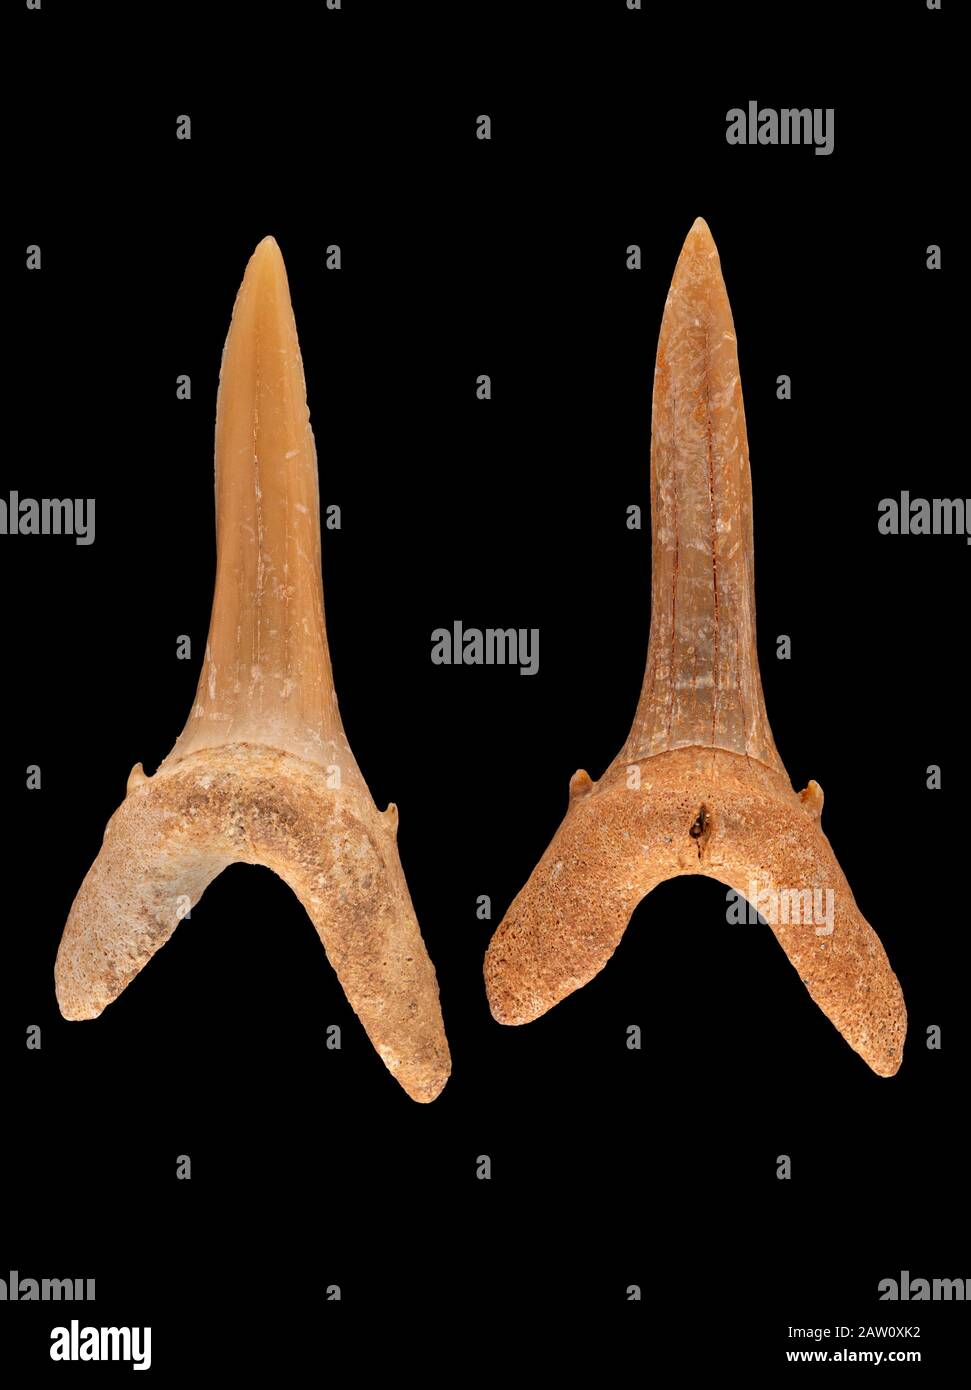 Two fossil anterior teeth of a sand tiger shark, Carcharias taurus. Sand tiger sharks evolved in the Miocene epoch, 5 to 23 million years ago, and are Stock Photo